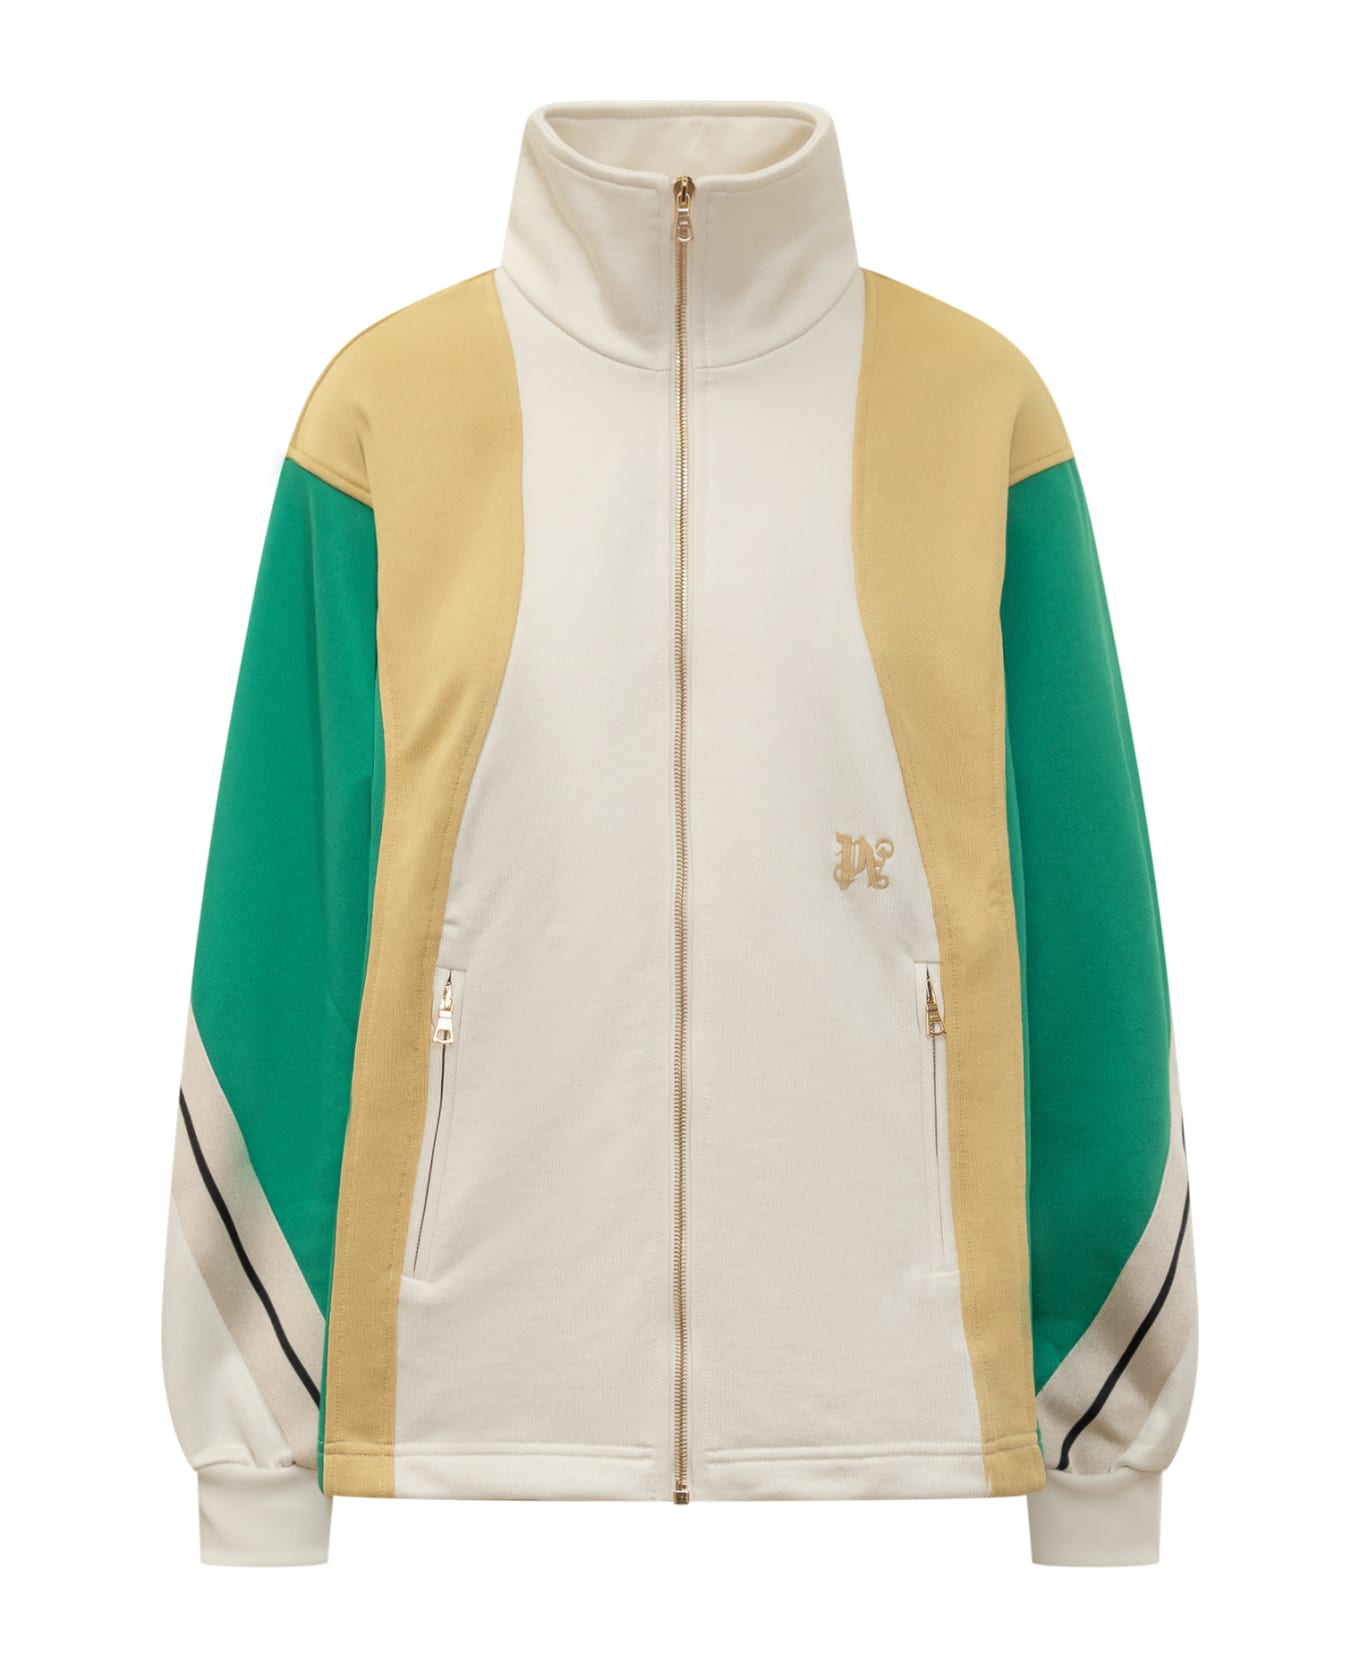 Palm Angels Monogram Embroidered Zipped Sweatshirt - OFF WHITE MULTICOLOR